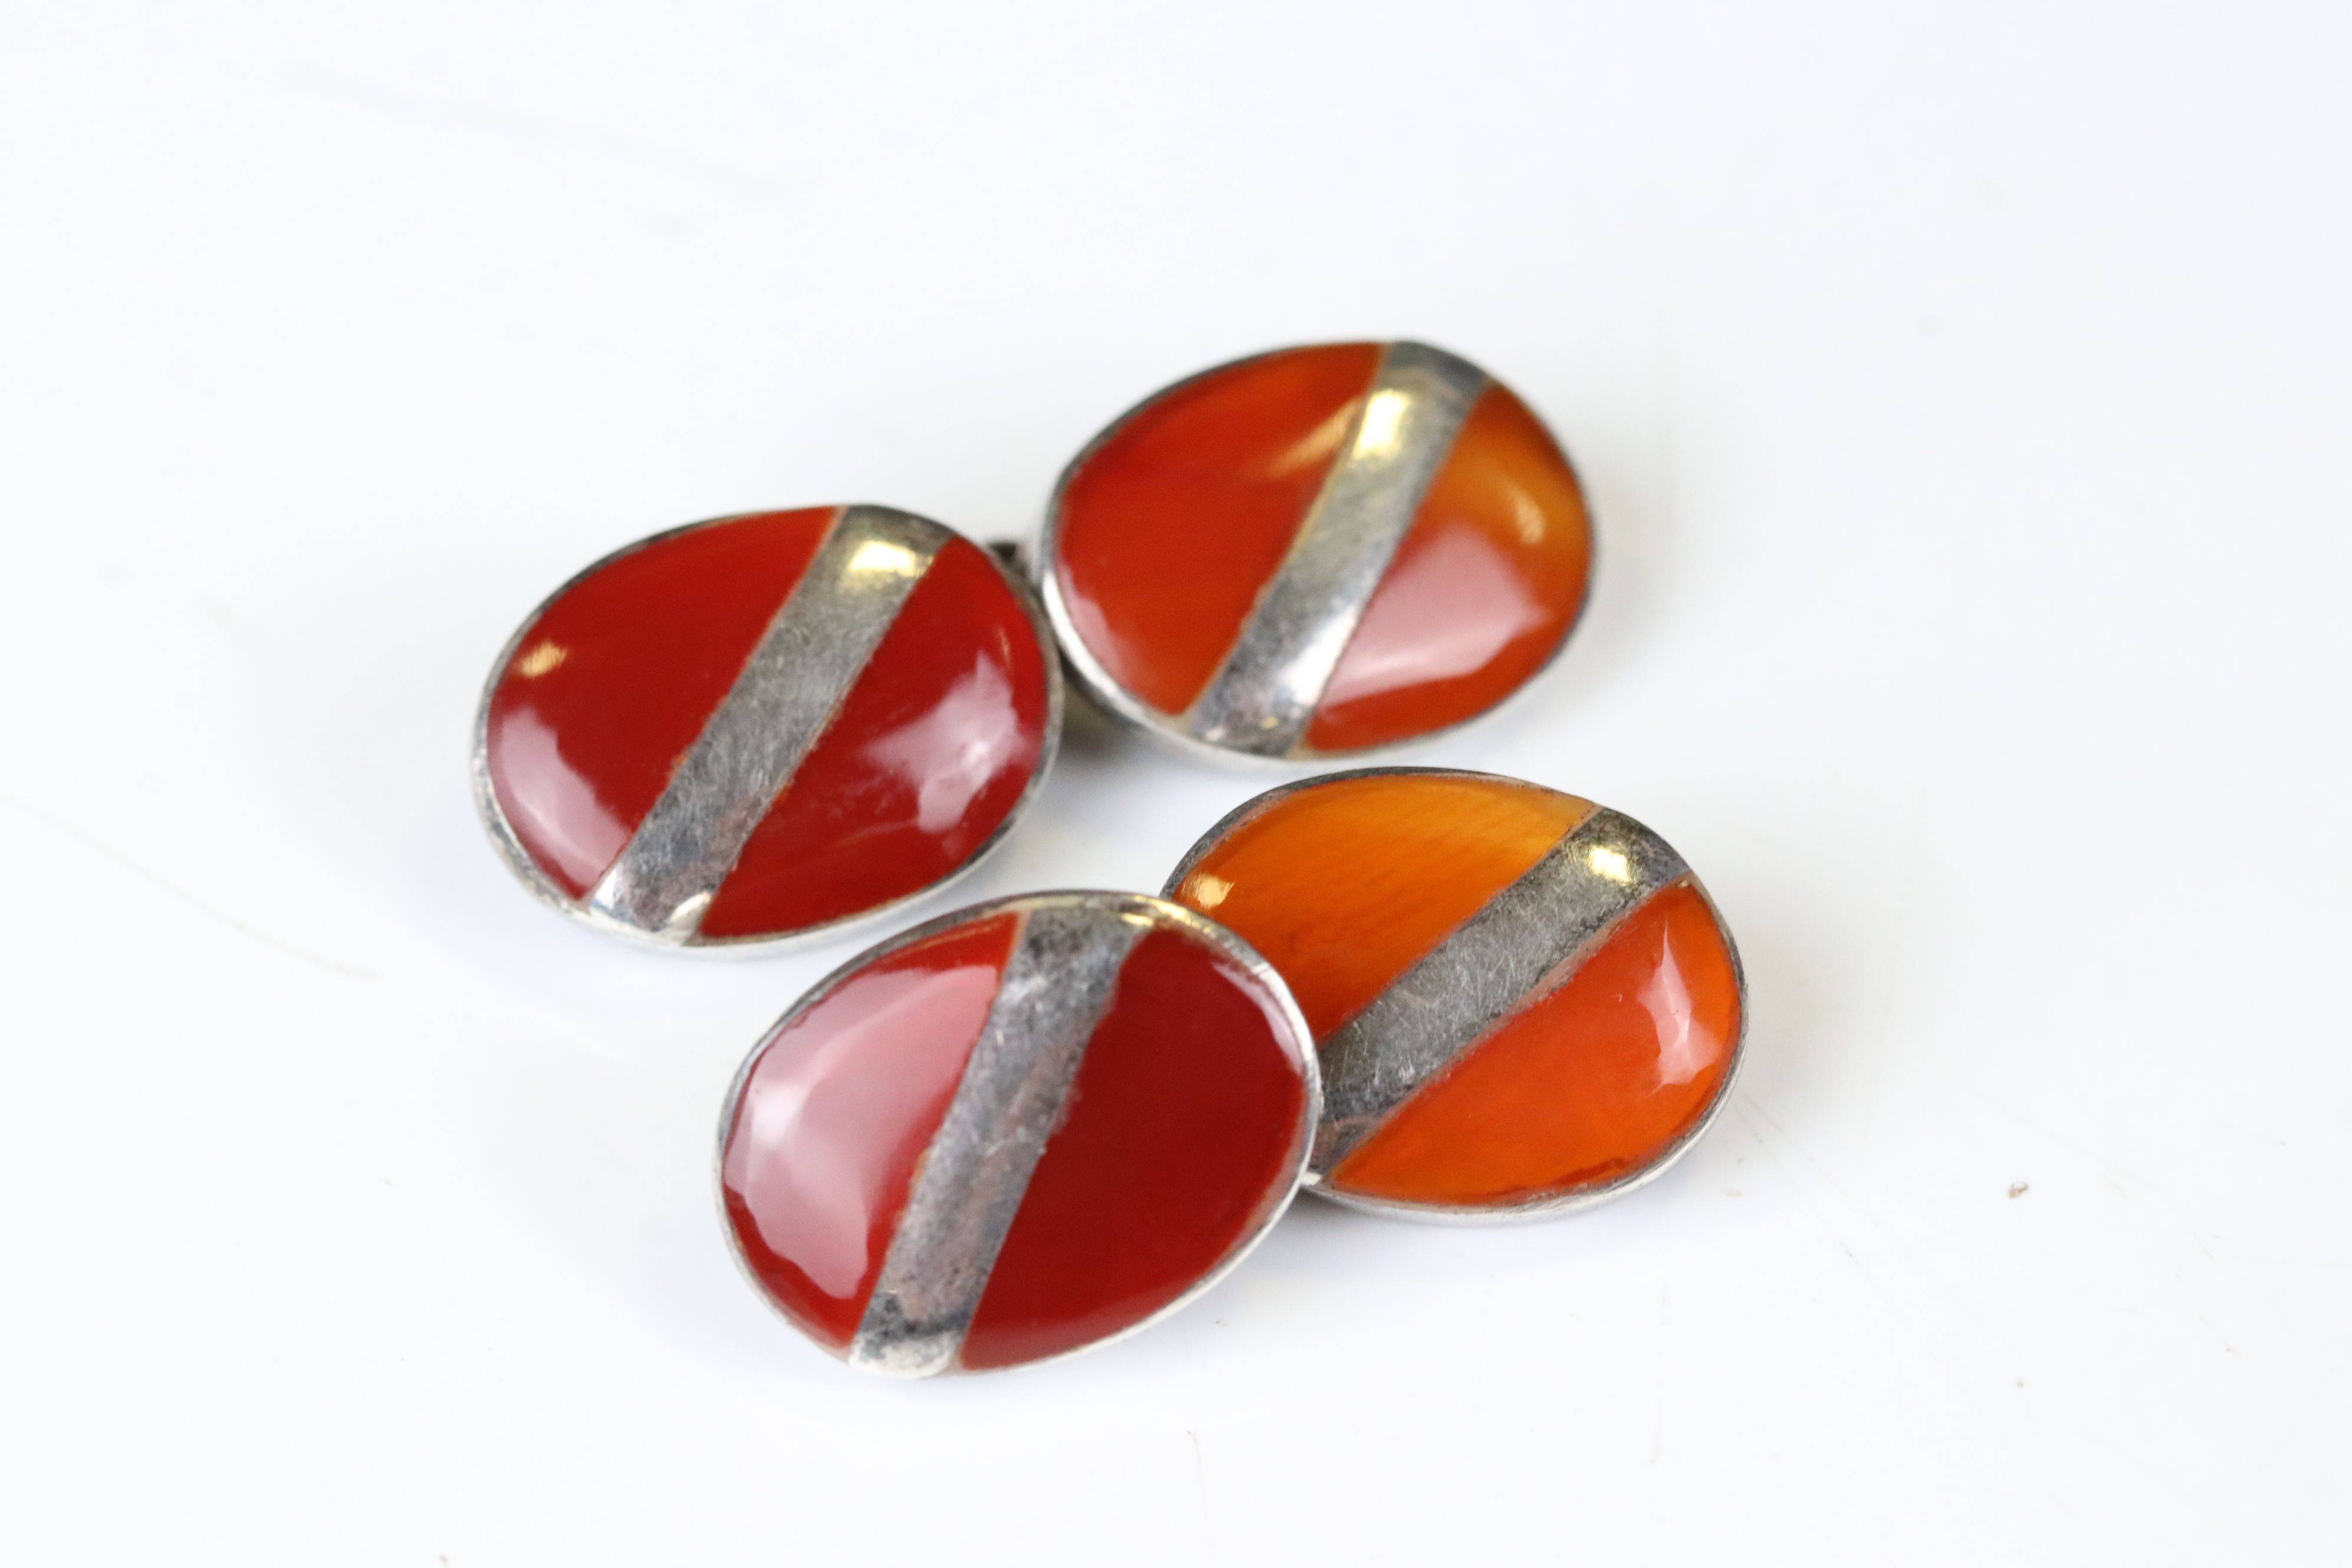 Pair of 1930's Silver and Polished Carnelian Double-sided Oval Cufflinks, stamped 925, each cufflink